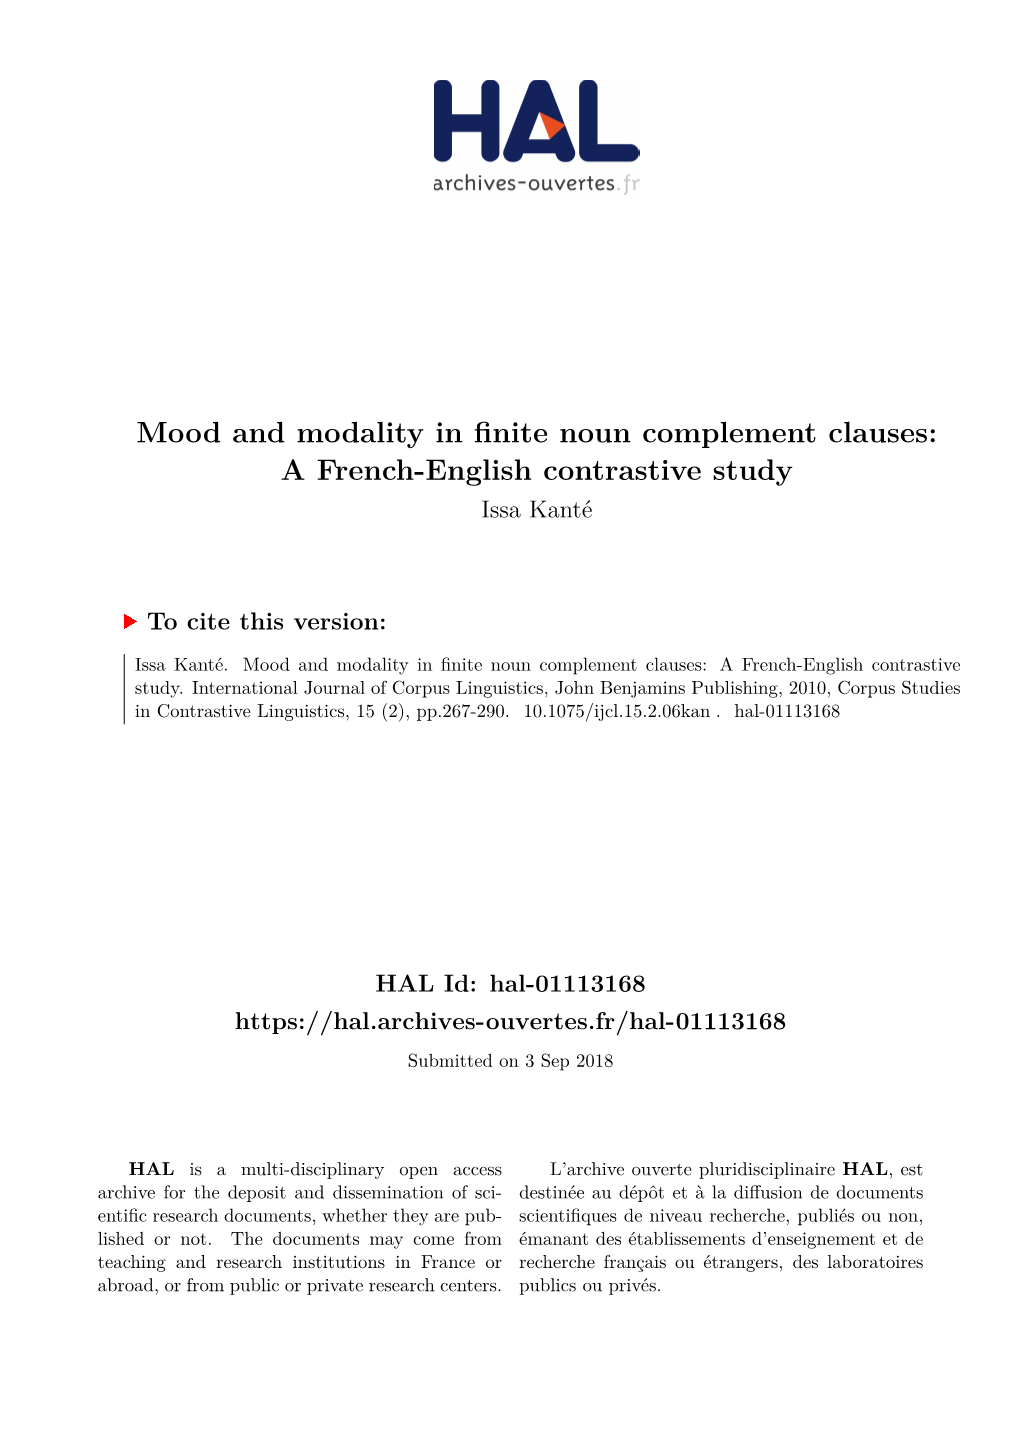 Mood and Modality in Finite Noun Complement Clauses: a French-English Contrastive Study Issa Kanté